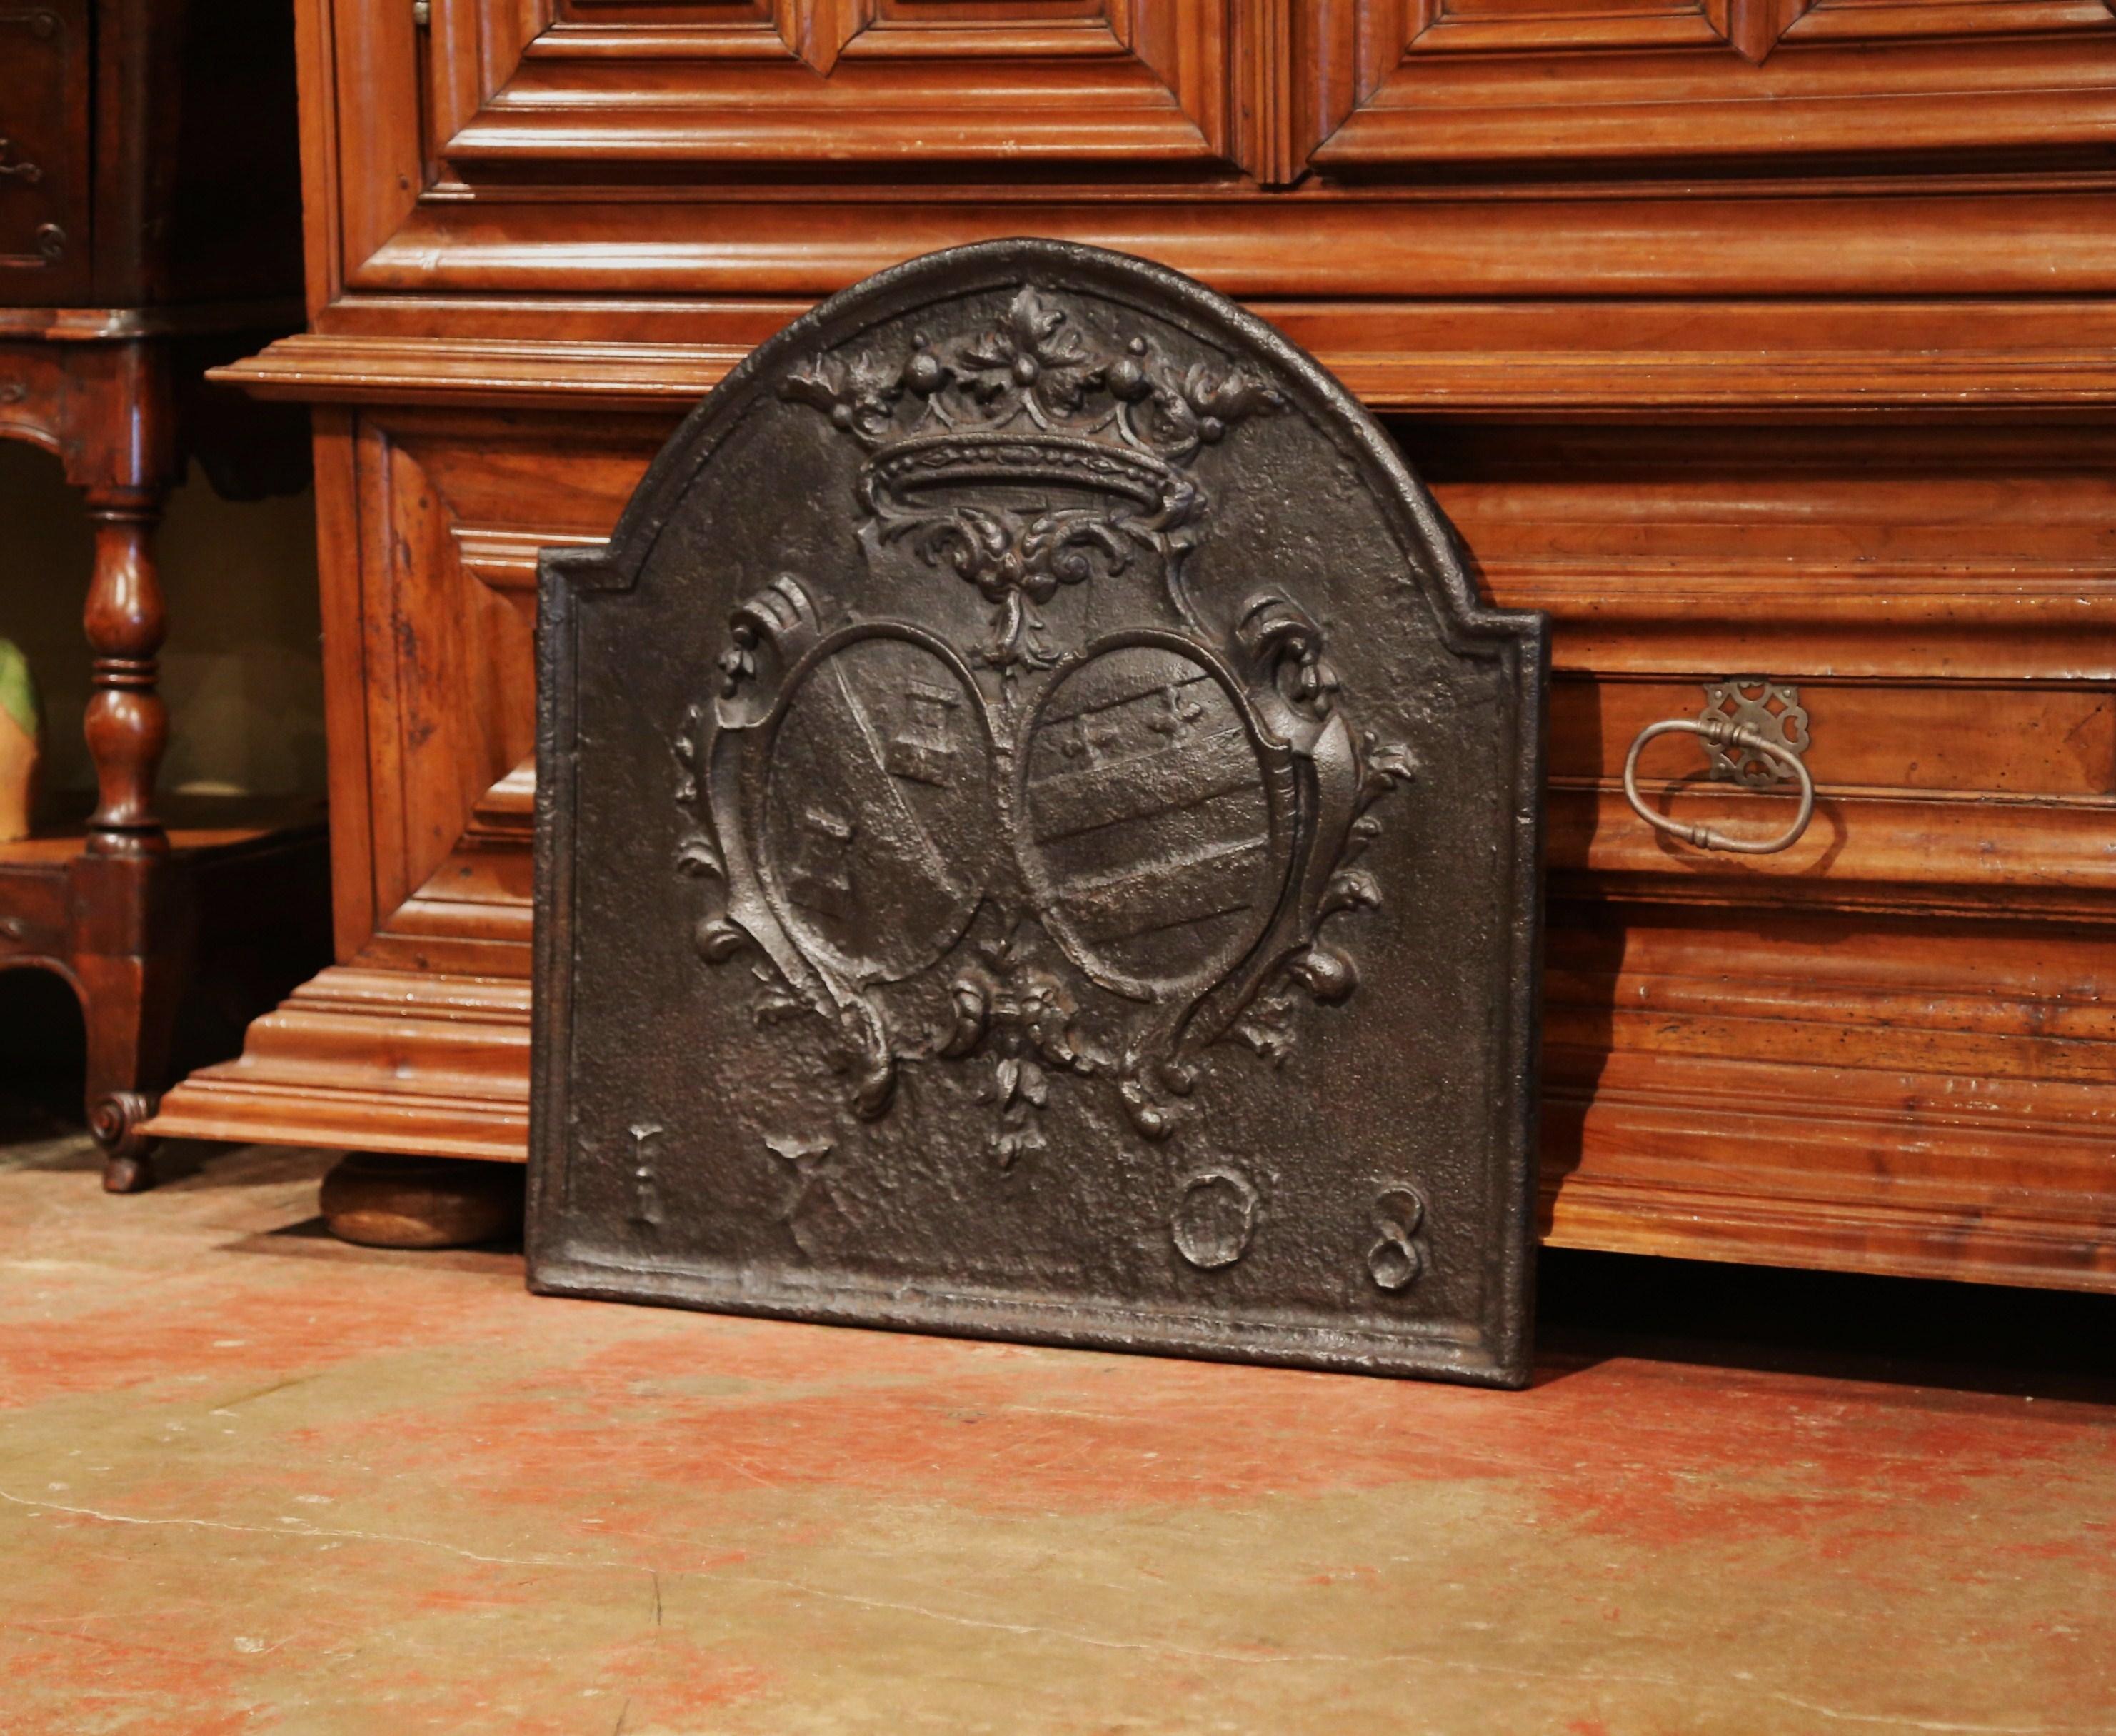 Decorate your fireplace or kitchen back splash with this large forged antique fire back. Created in Southern France and dated 1708, the Louis XIV period carved piece features an arched top with an intricate crown at the pediment, and a family coat